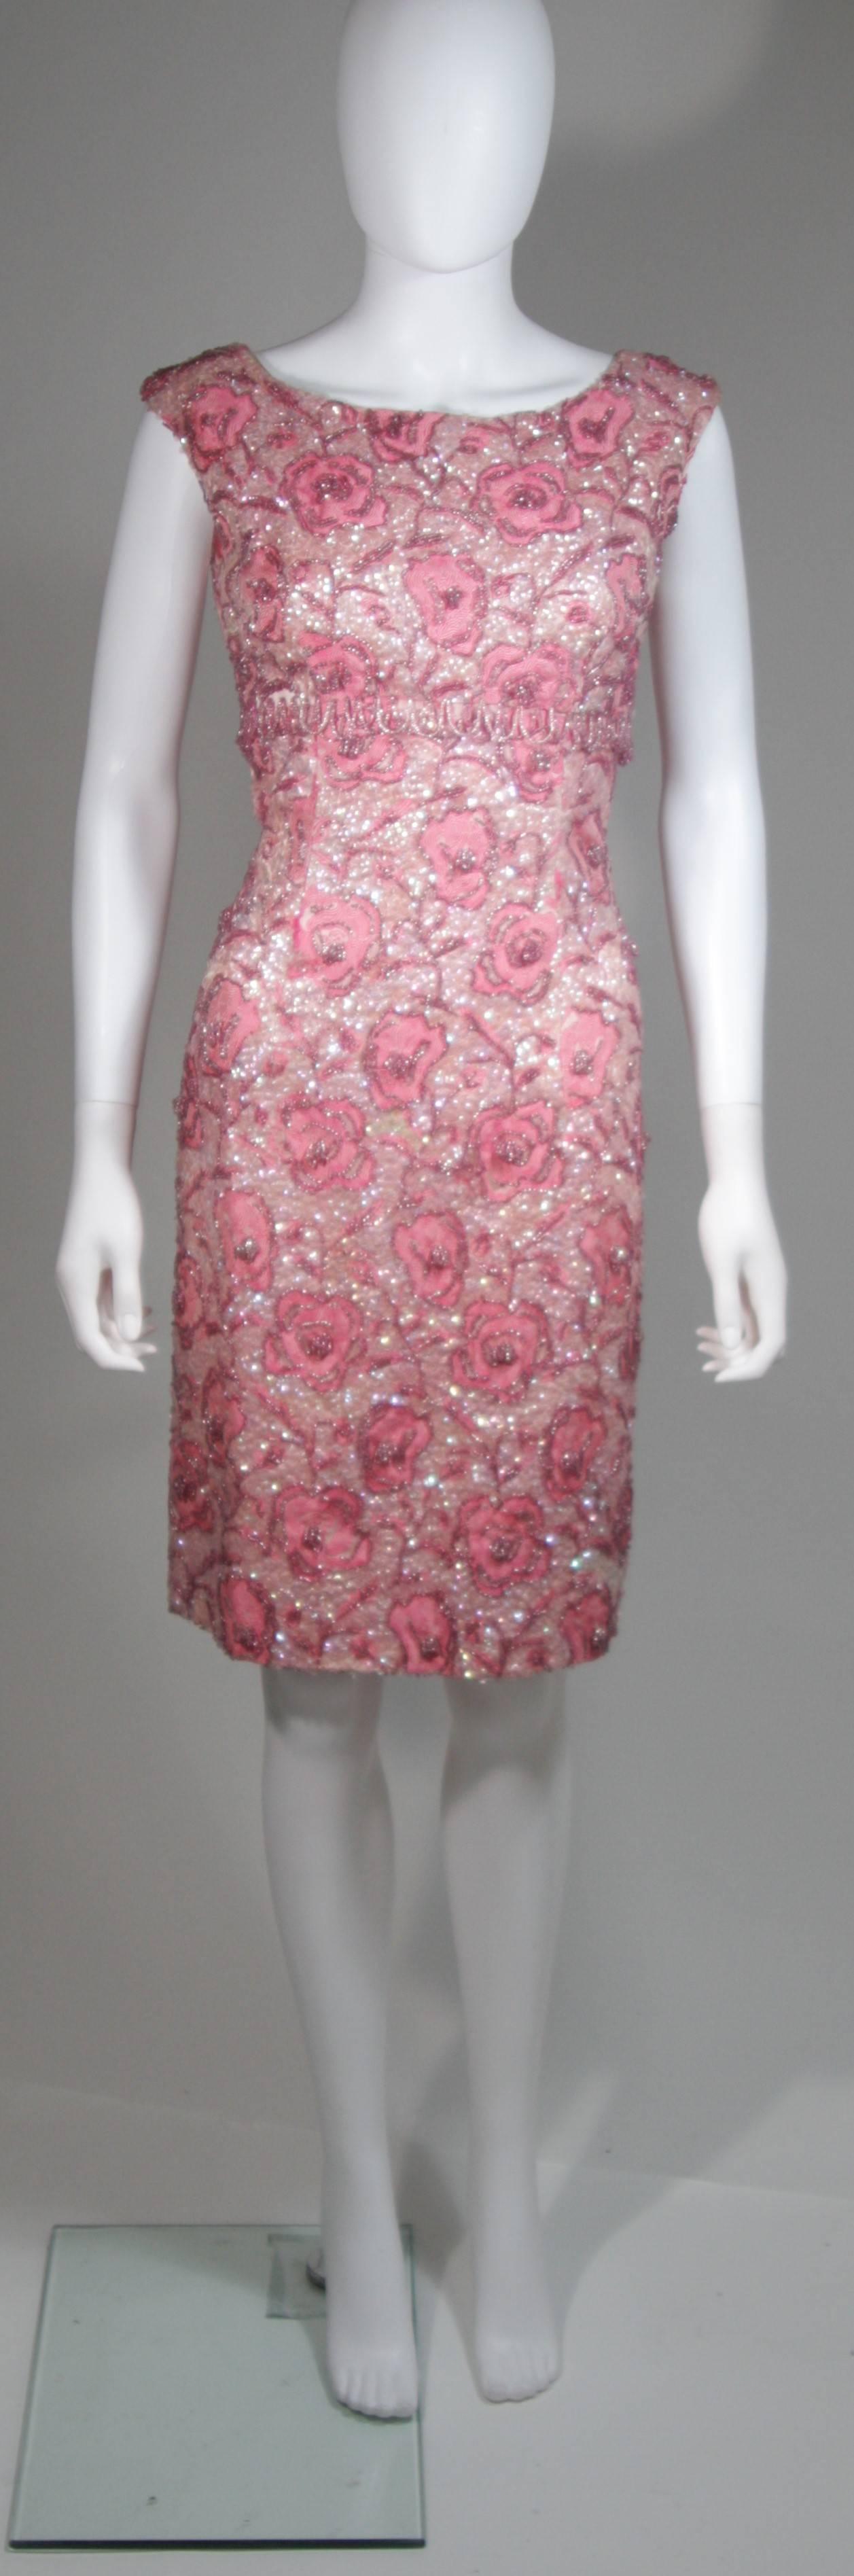 This vintage cocktail dress is composed of a pink floral brocade fabric embellished with sequins and beading. There is a center back zipper closure. In excellent vintage condition. 

**Please cross-reference measurements for personal accuracy.